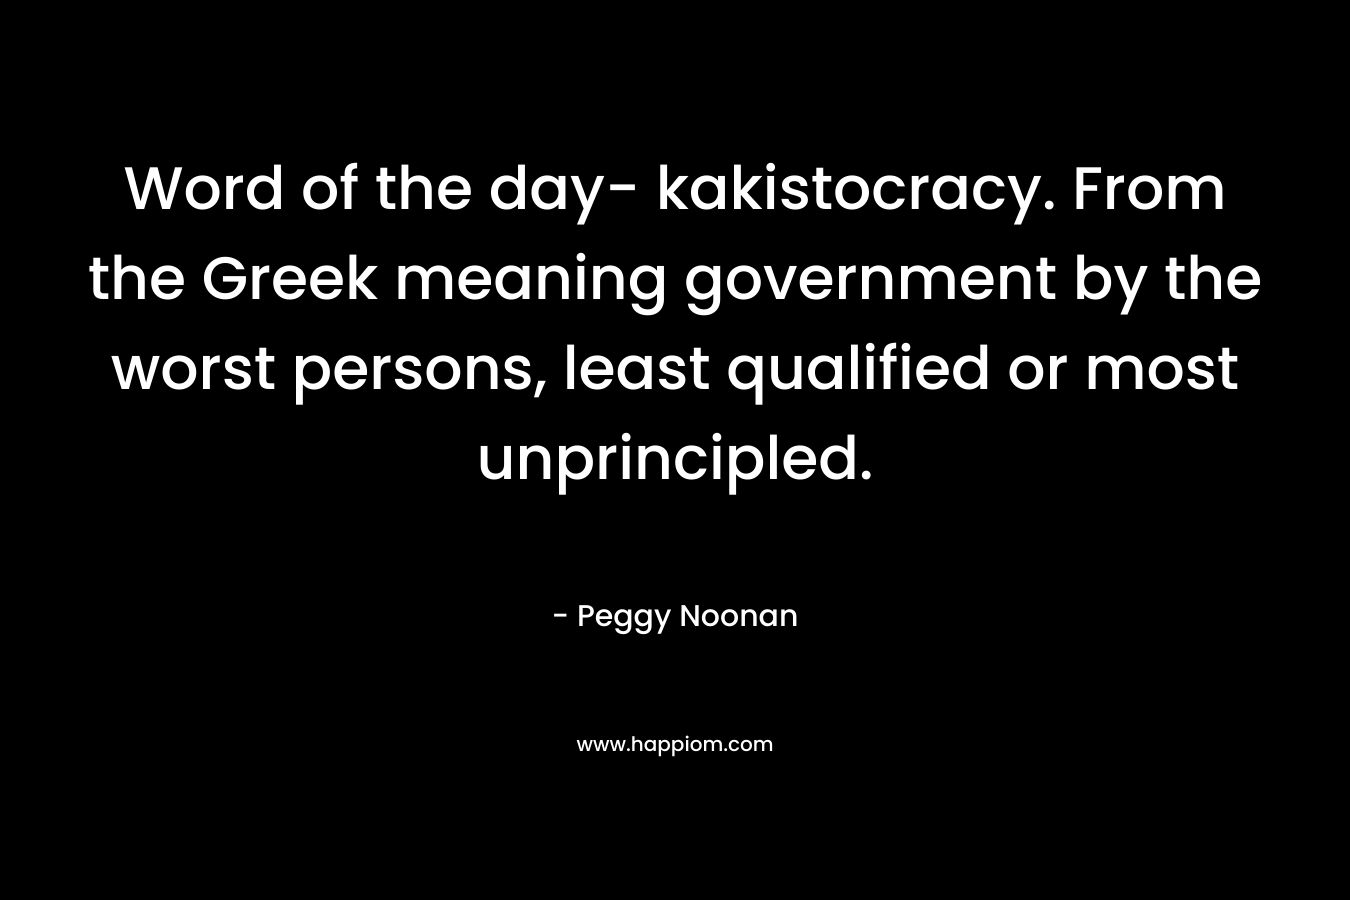 Word of the day- kakistocracy. From the Greek meaning government by the worst persons, least qualified or most unprincipled. – Peggy Noonan